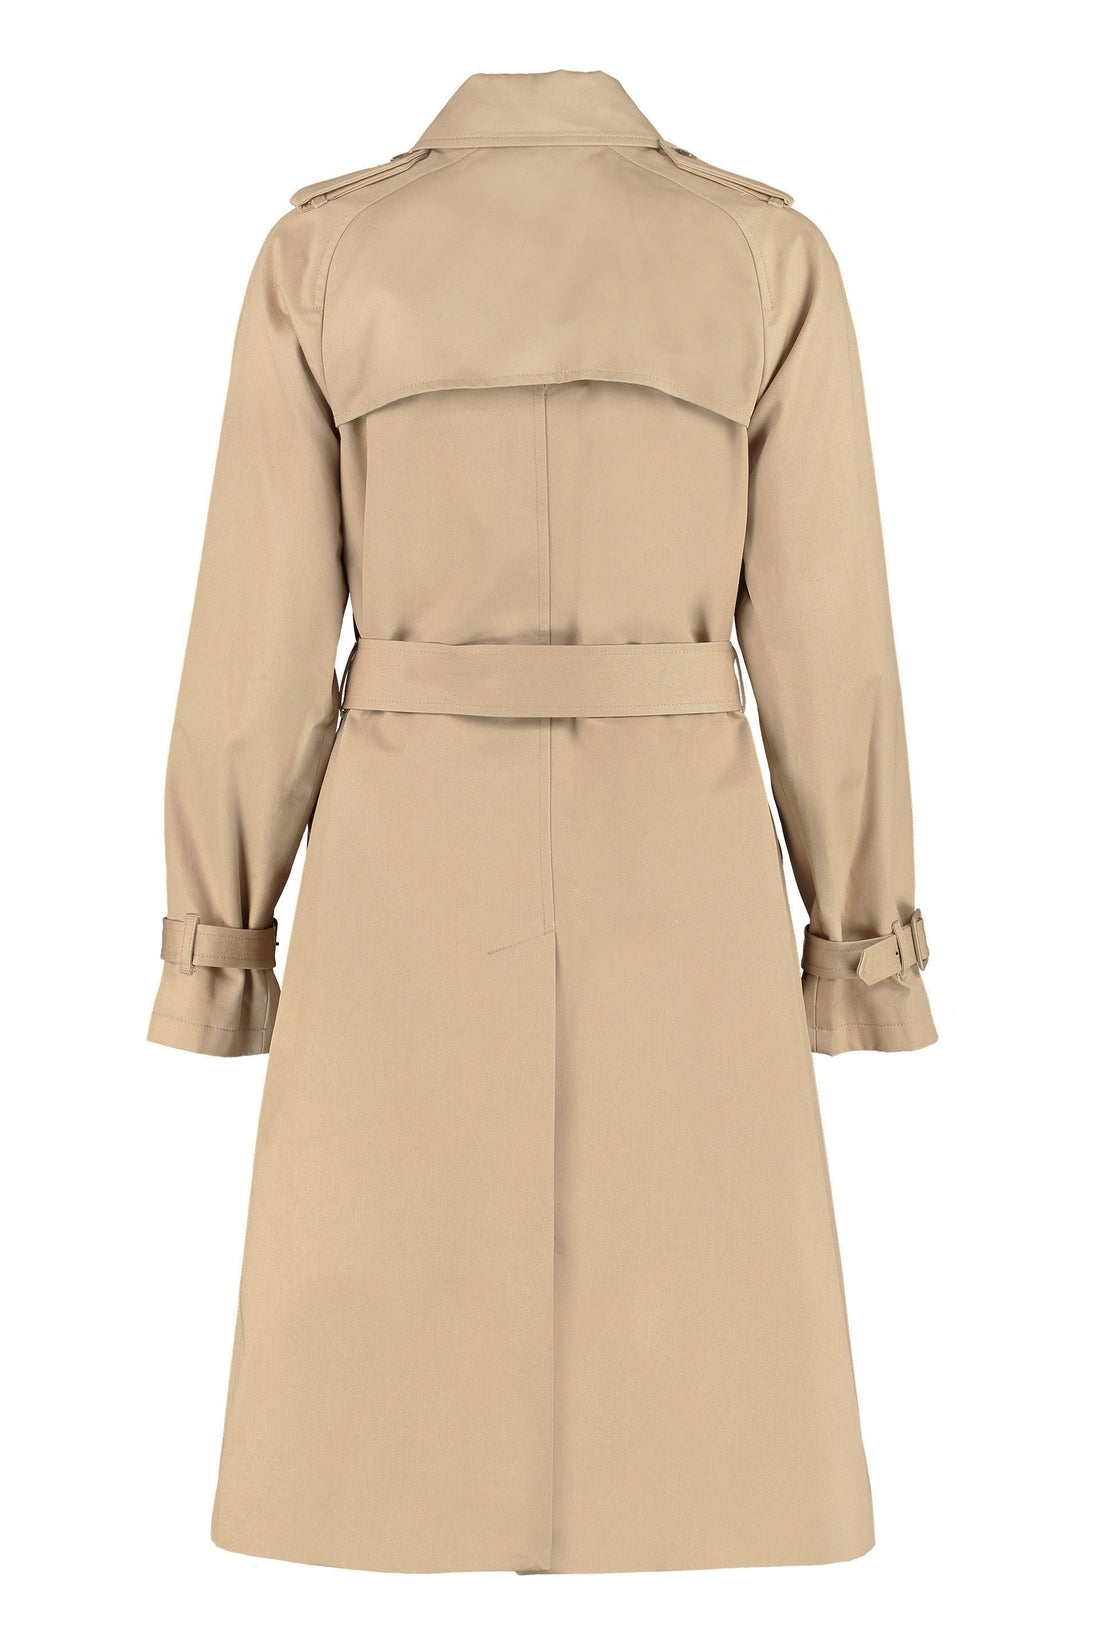 A.P.C.-OUTLET-SALE-Greta double-breasted trench coat-ARCHIVIST